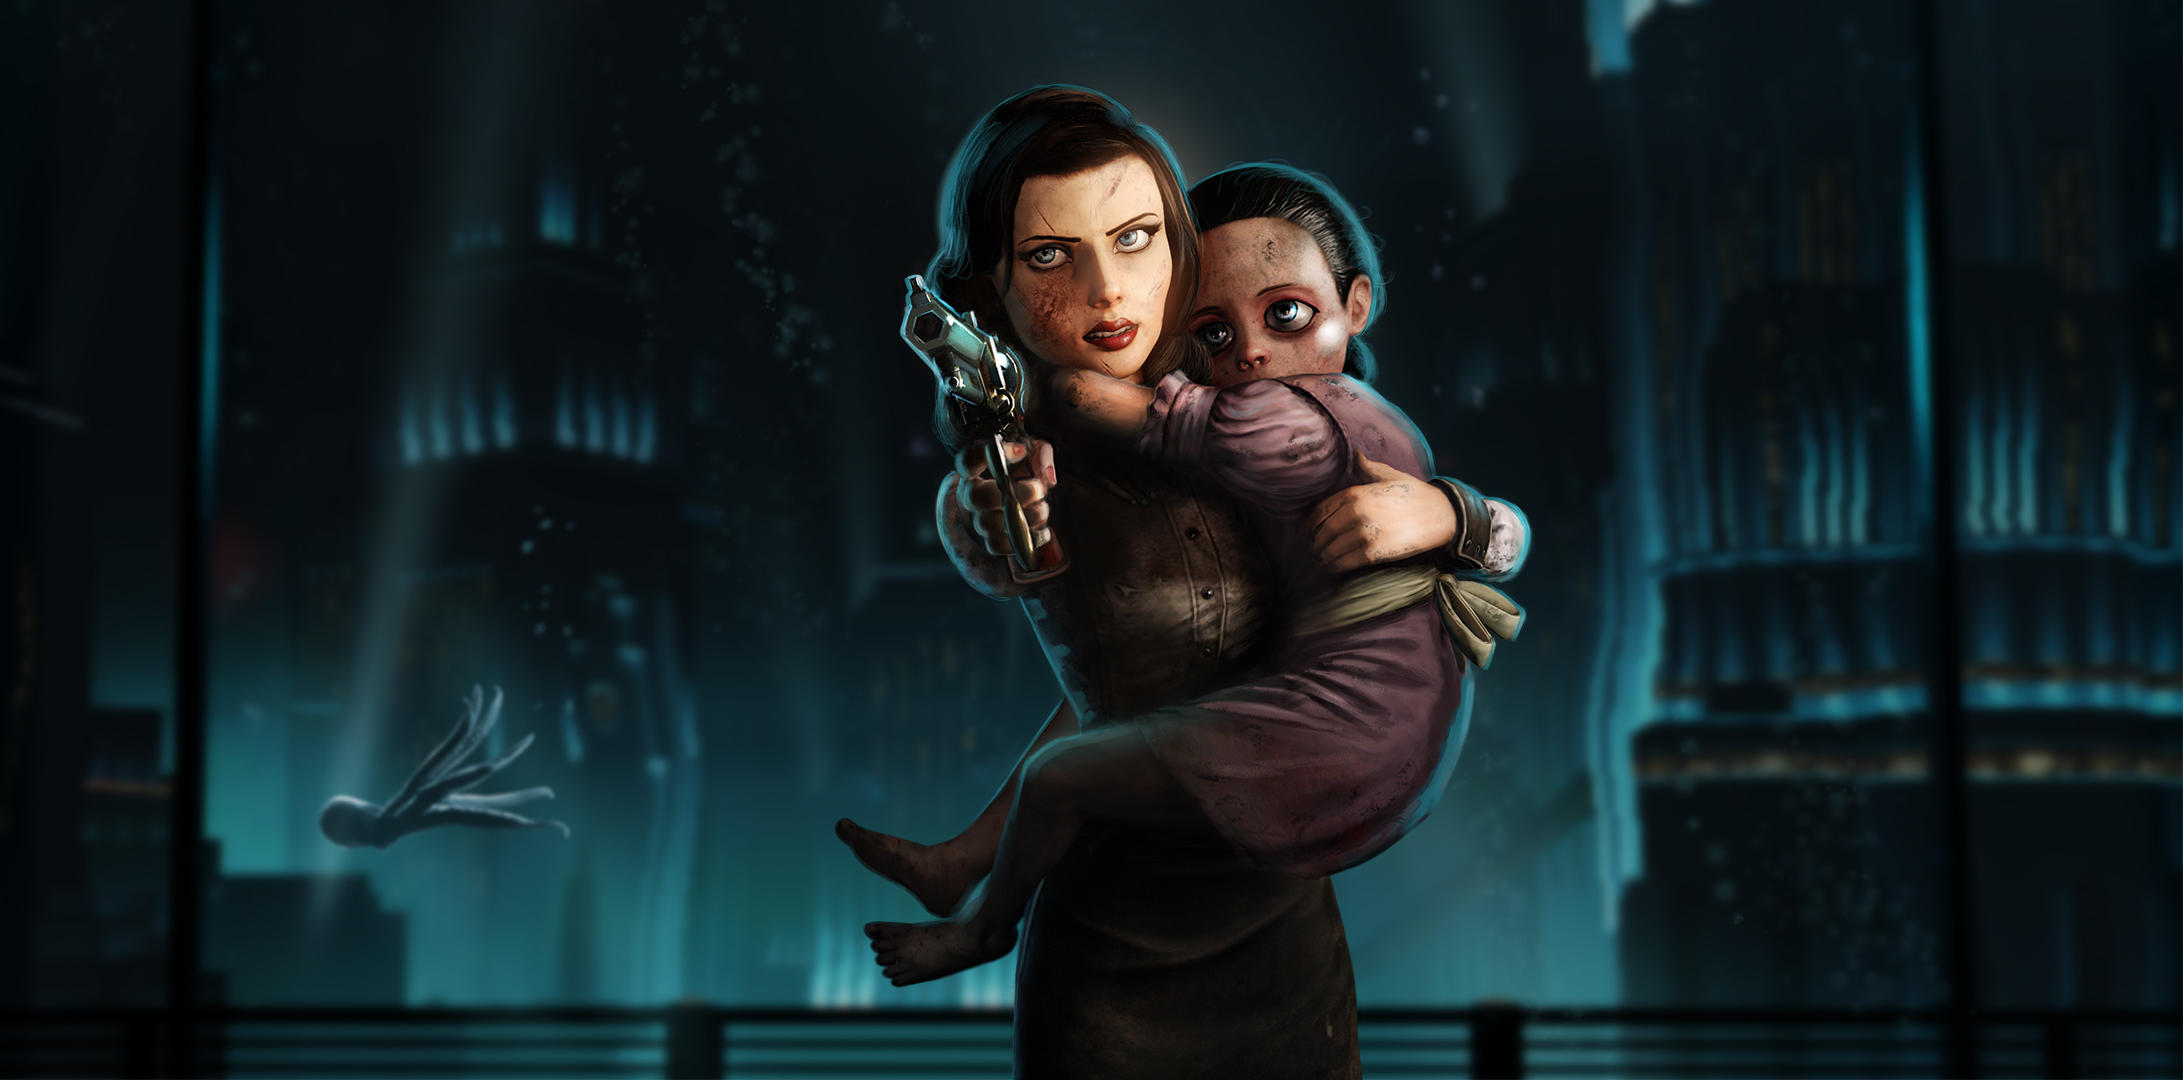 Bioshock Infinite: Burial At Sea Episode 2 Available Now